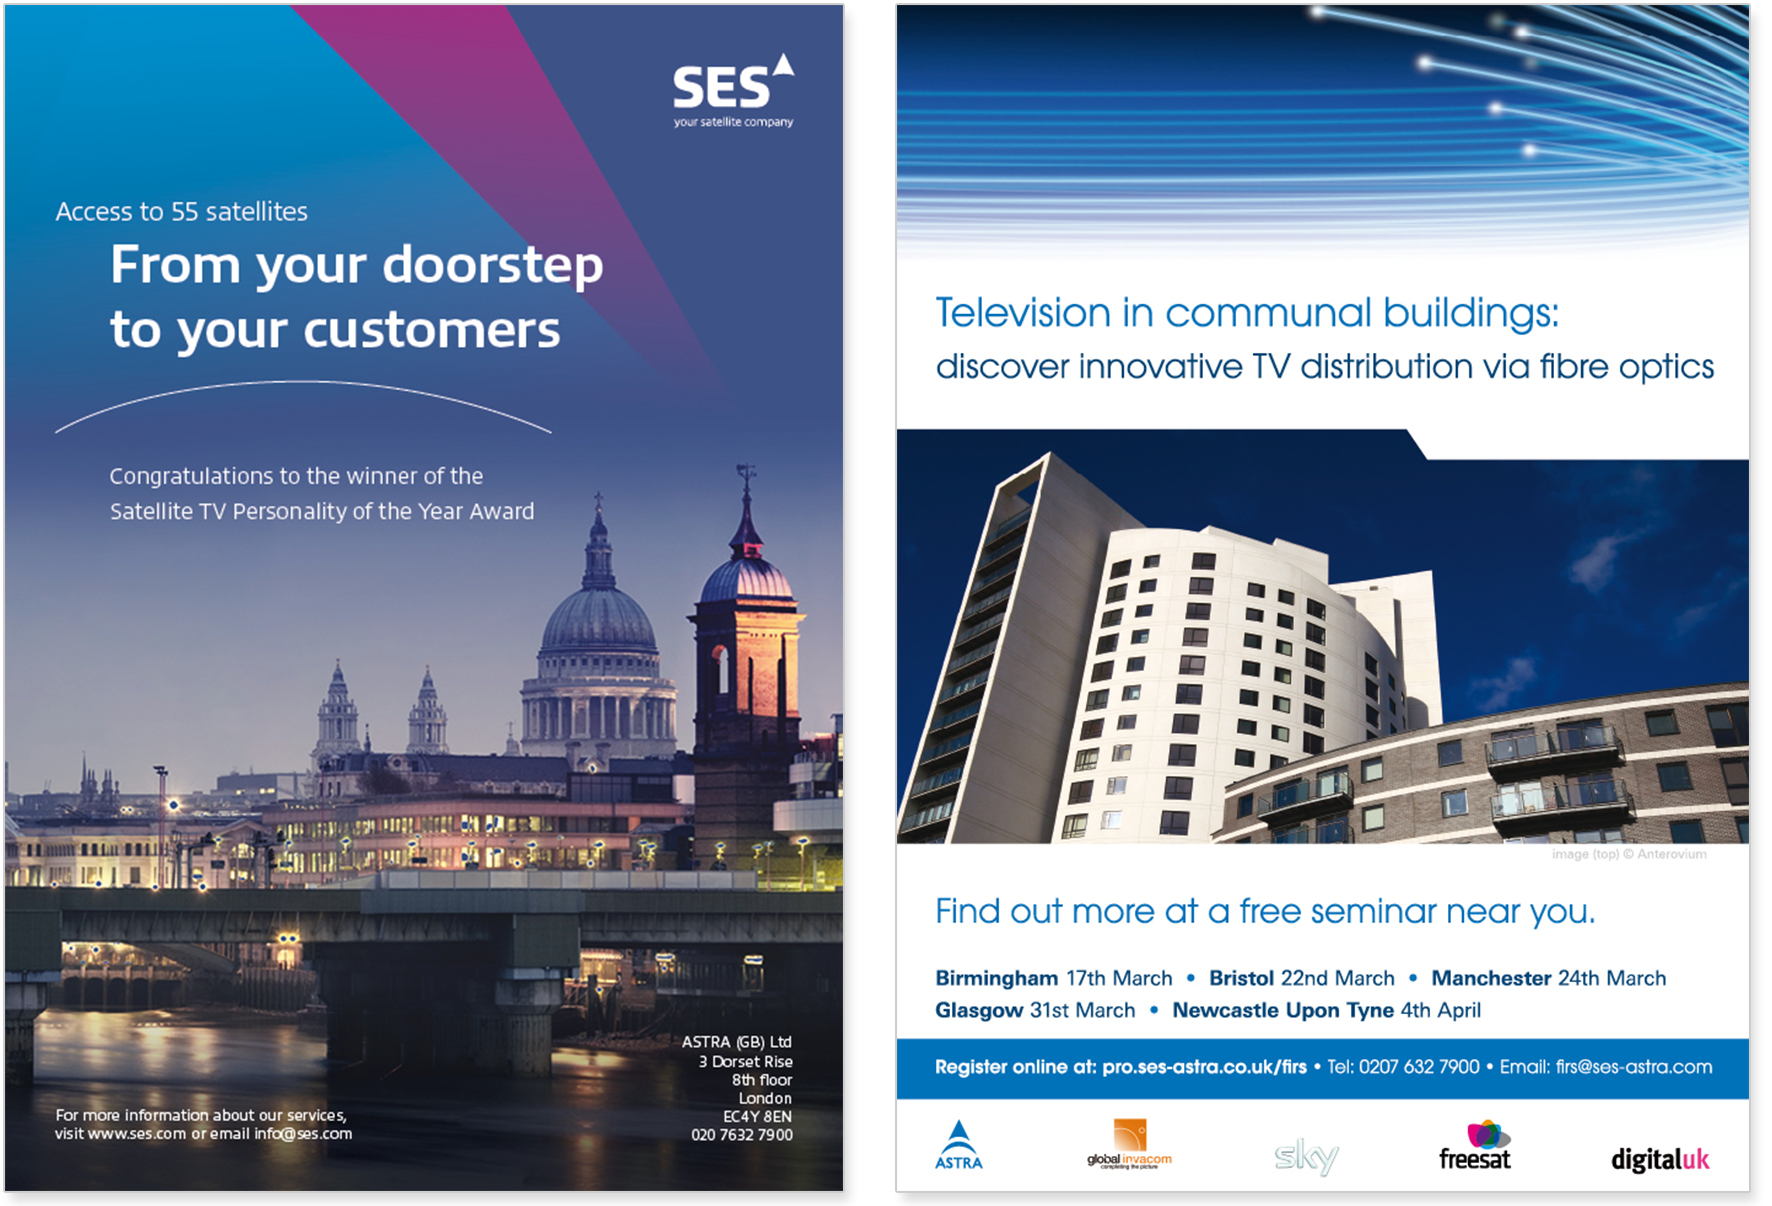 Advertisements for SES Astra